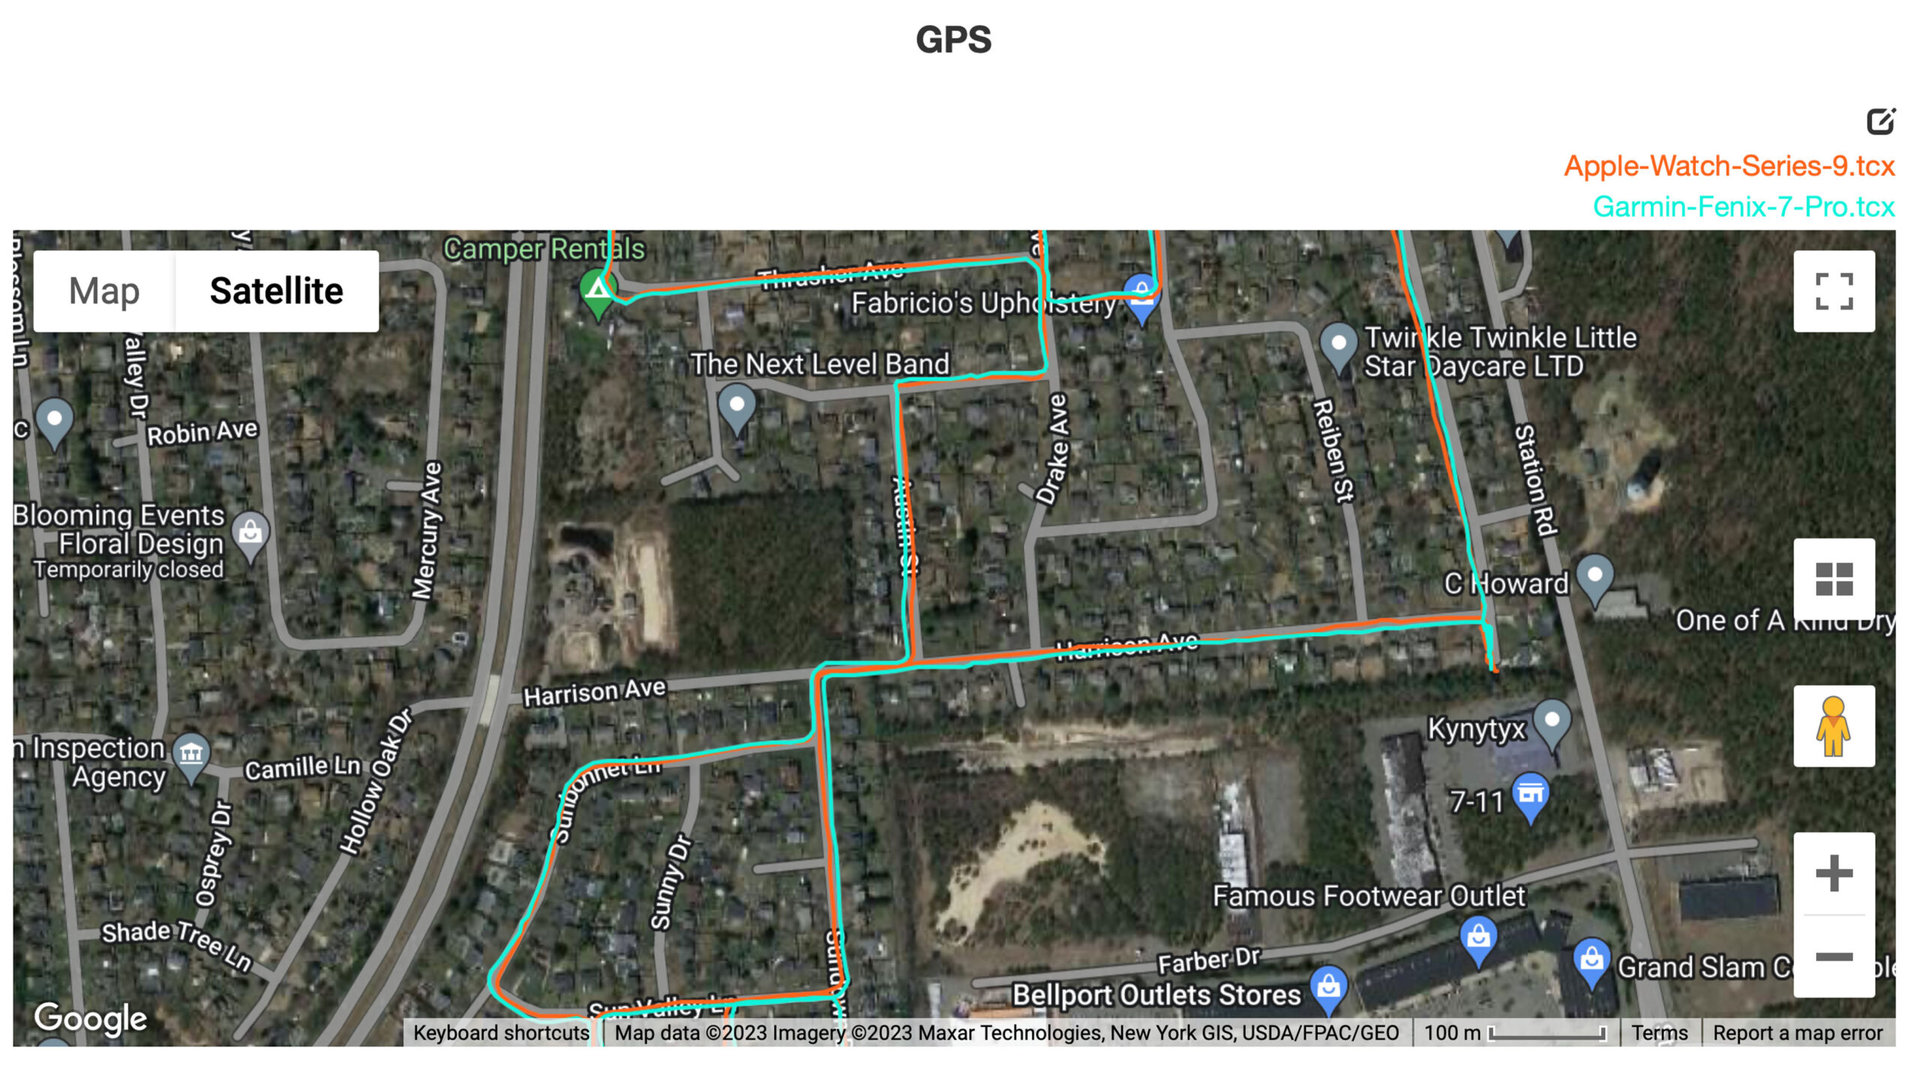 GPS data shows closely aligned tracking via a Garmin Fenix 7 Pro and an Apple Watch Series 9.